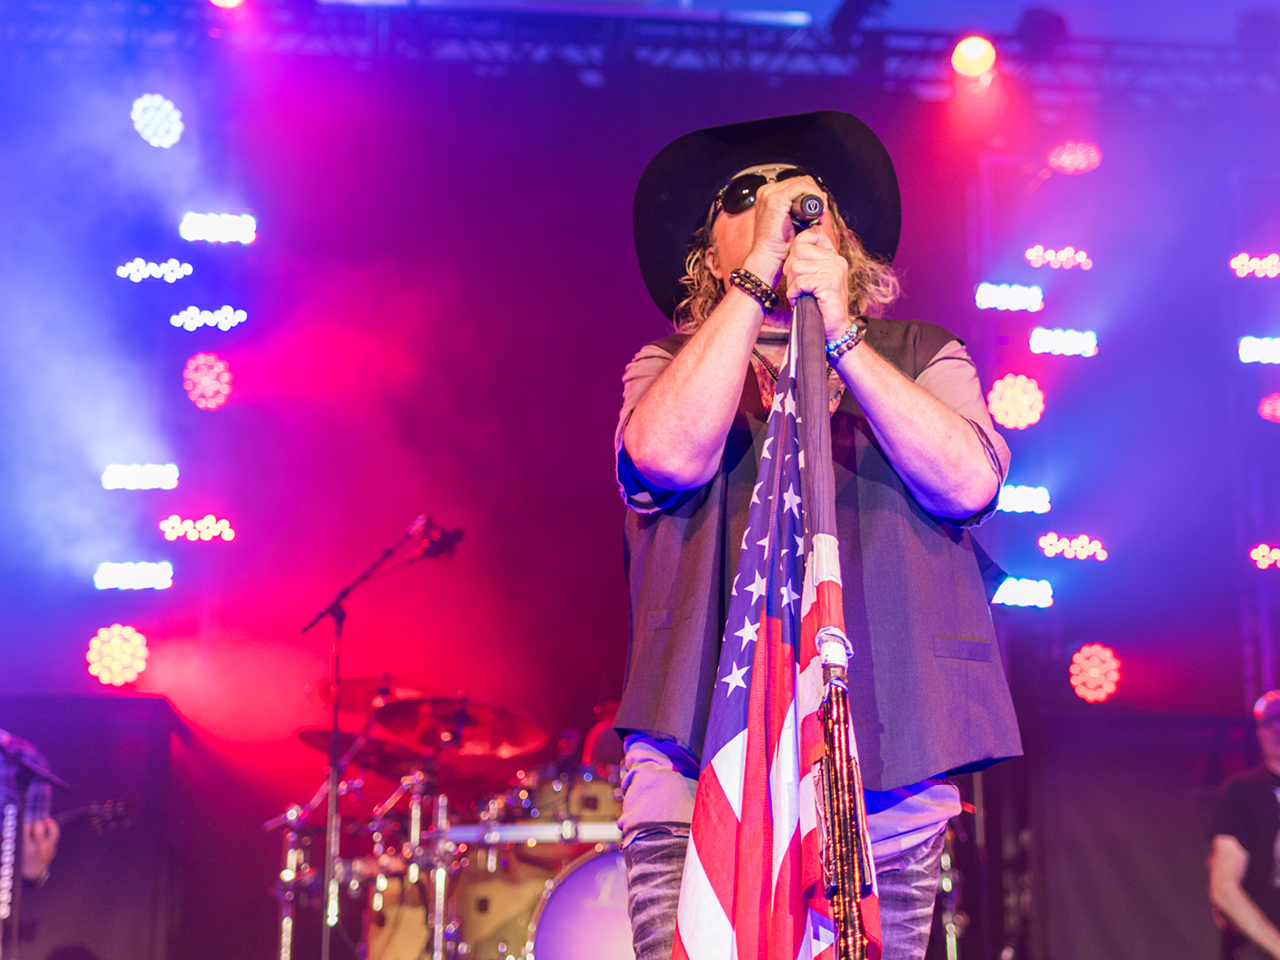 Country music artist Colt Ford was one of the original Diamond Resorts Celebrity ambassadors and helped launch the Diamond Live series.